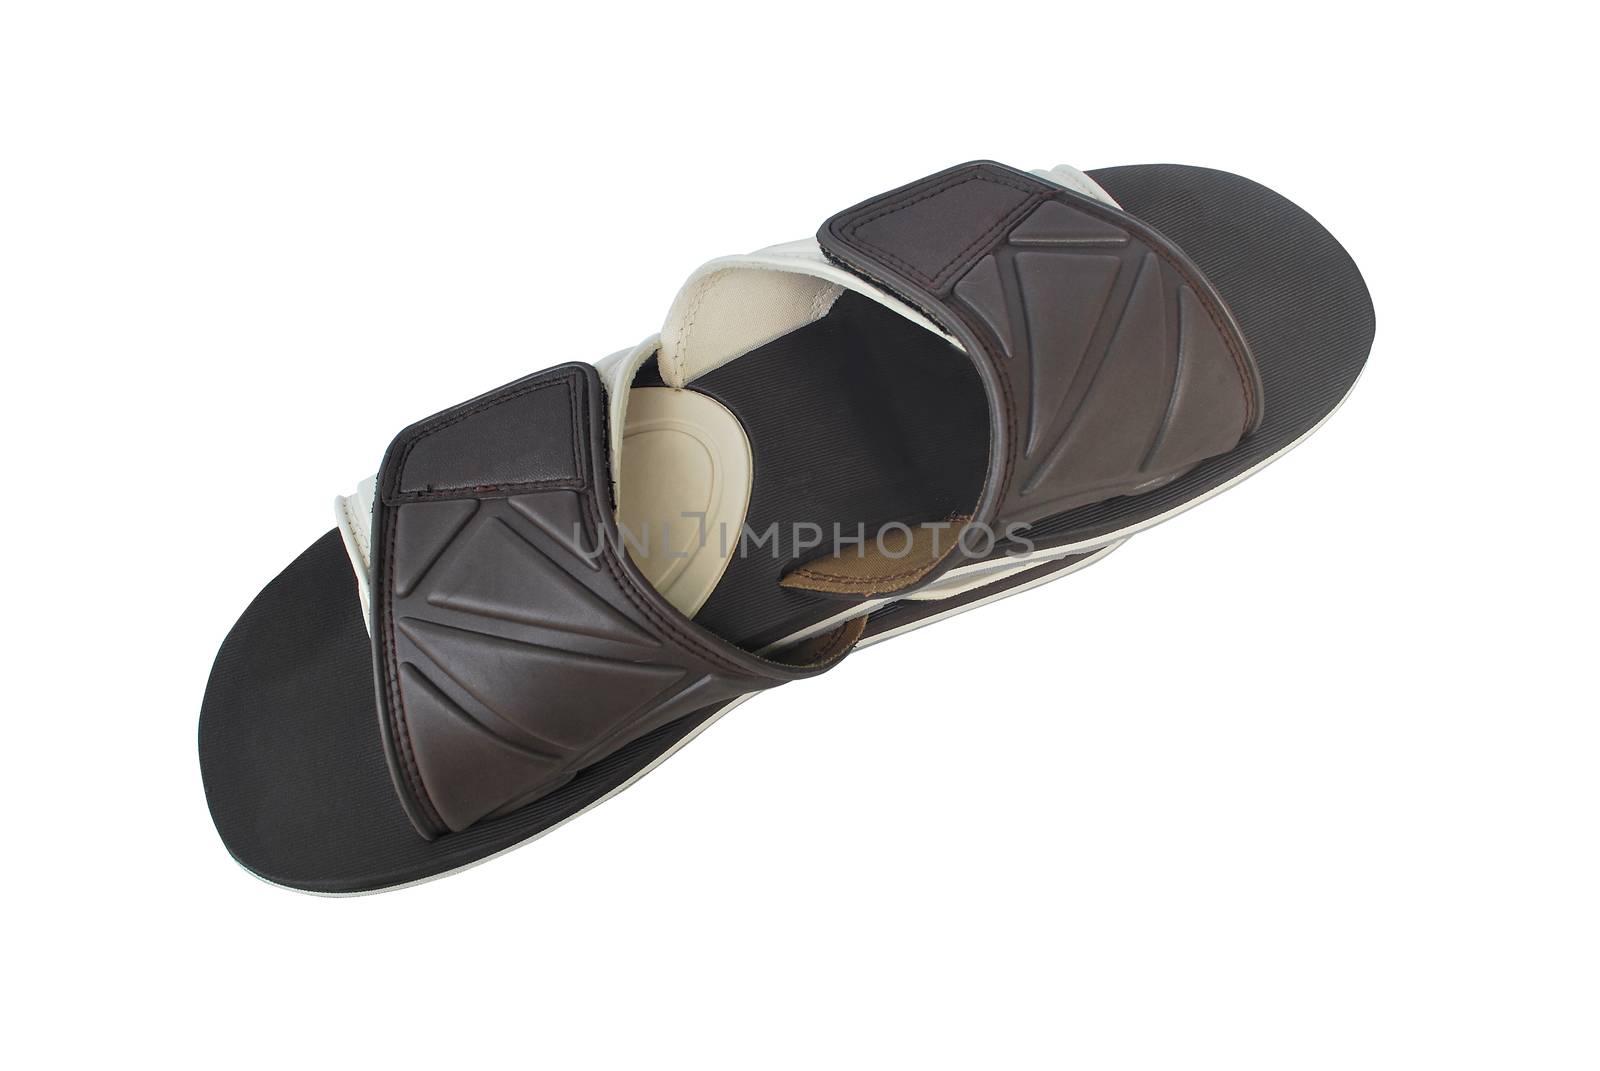 Dark brown sandals on white background.With Clipping Path.